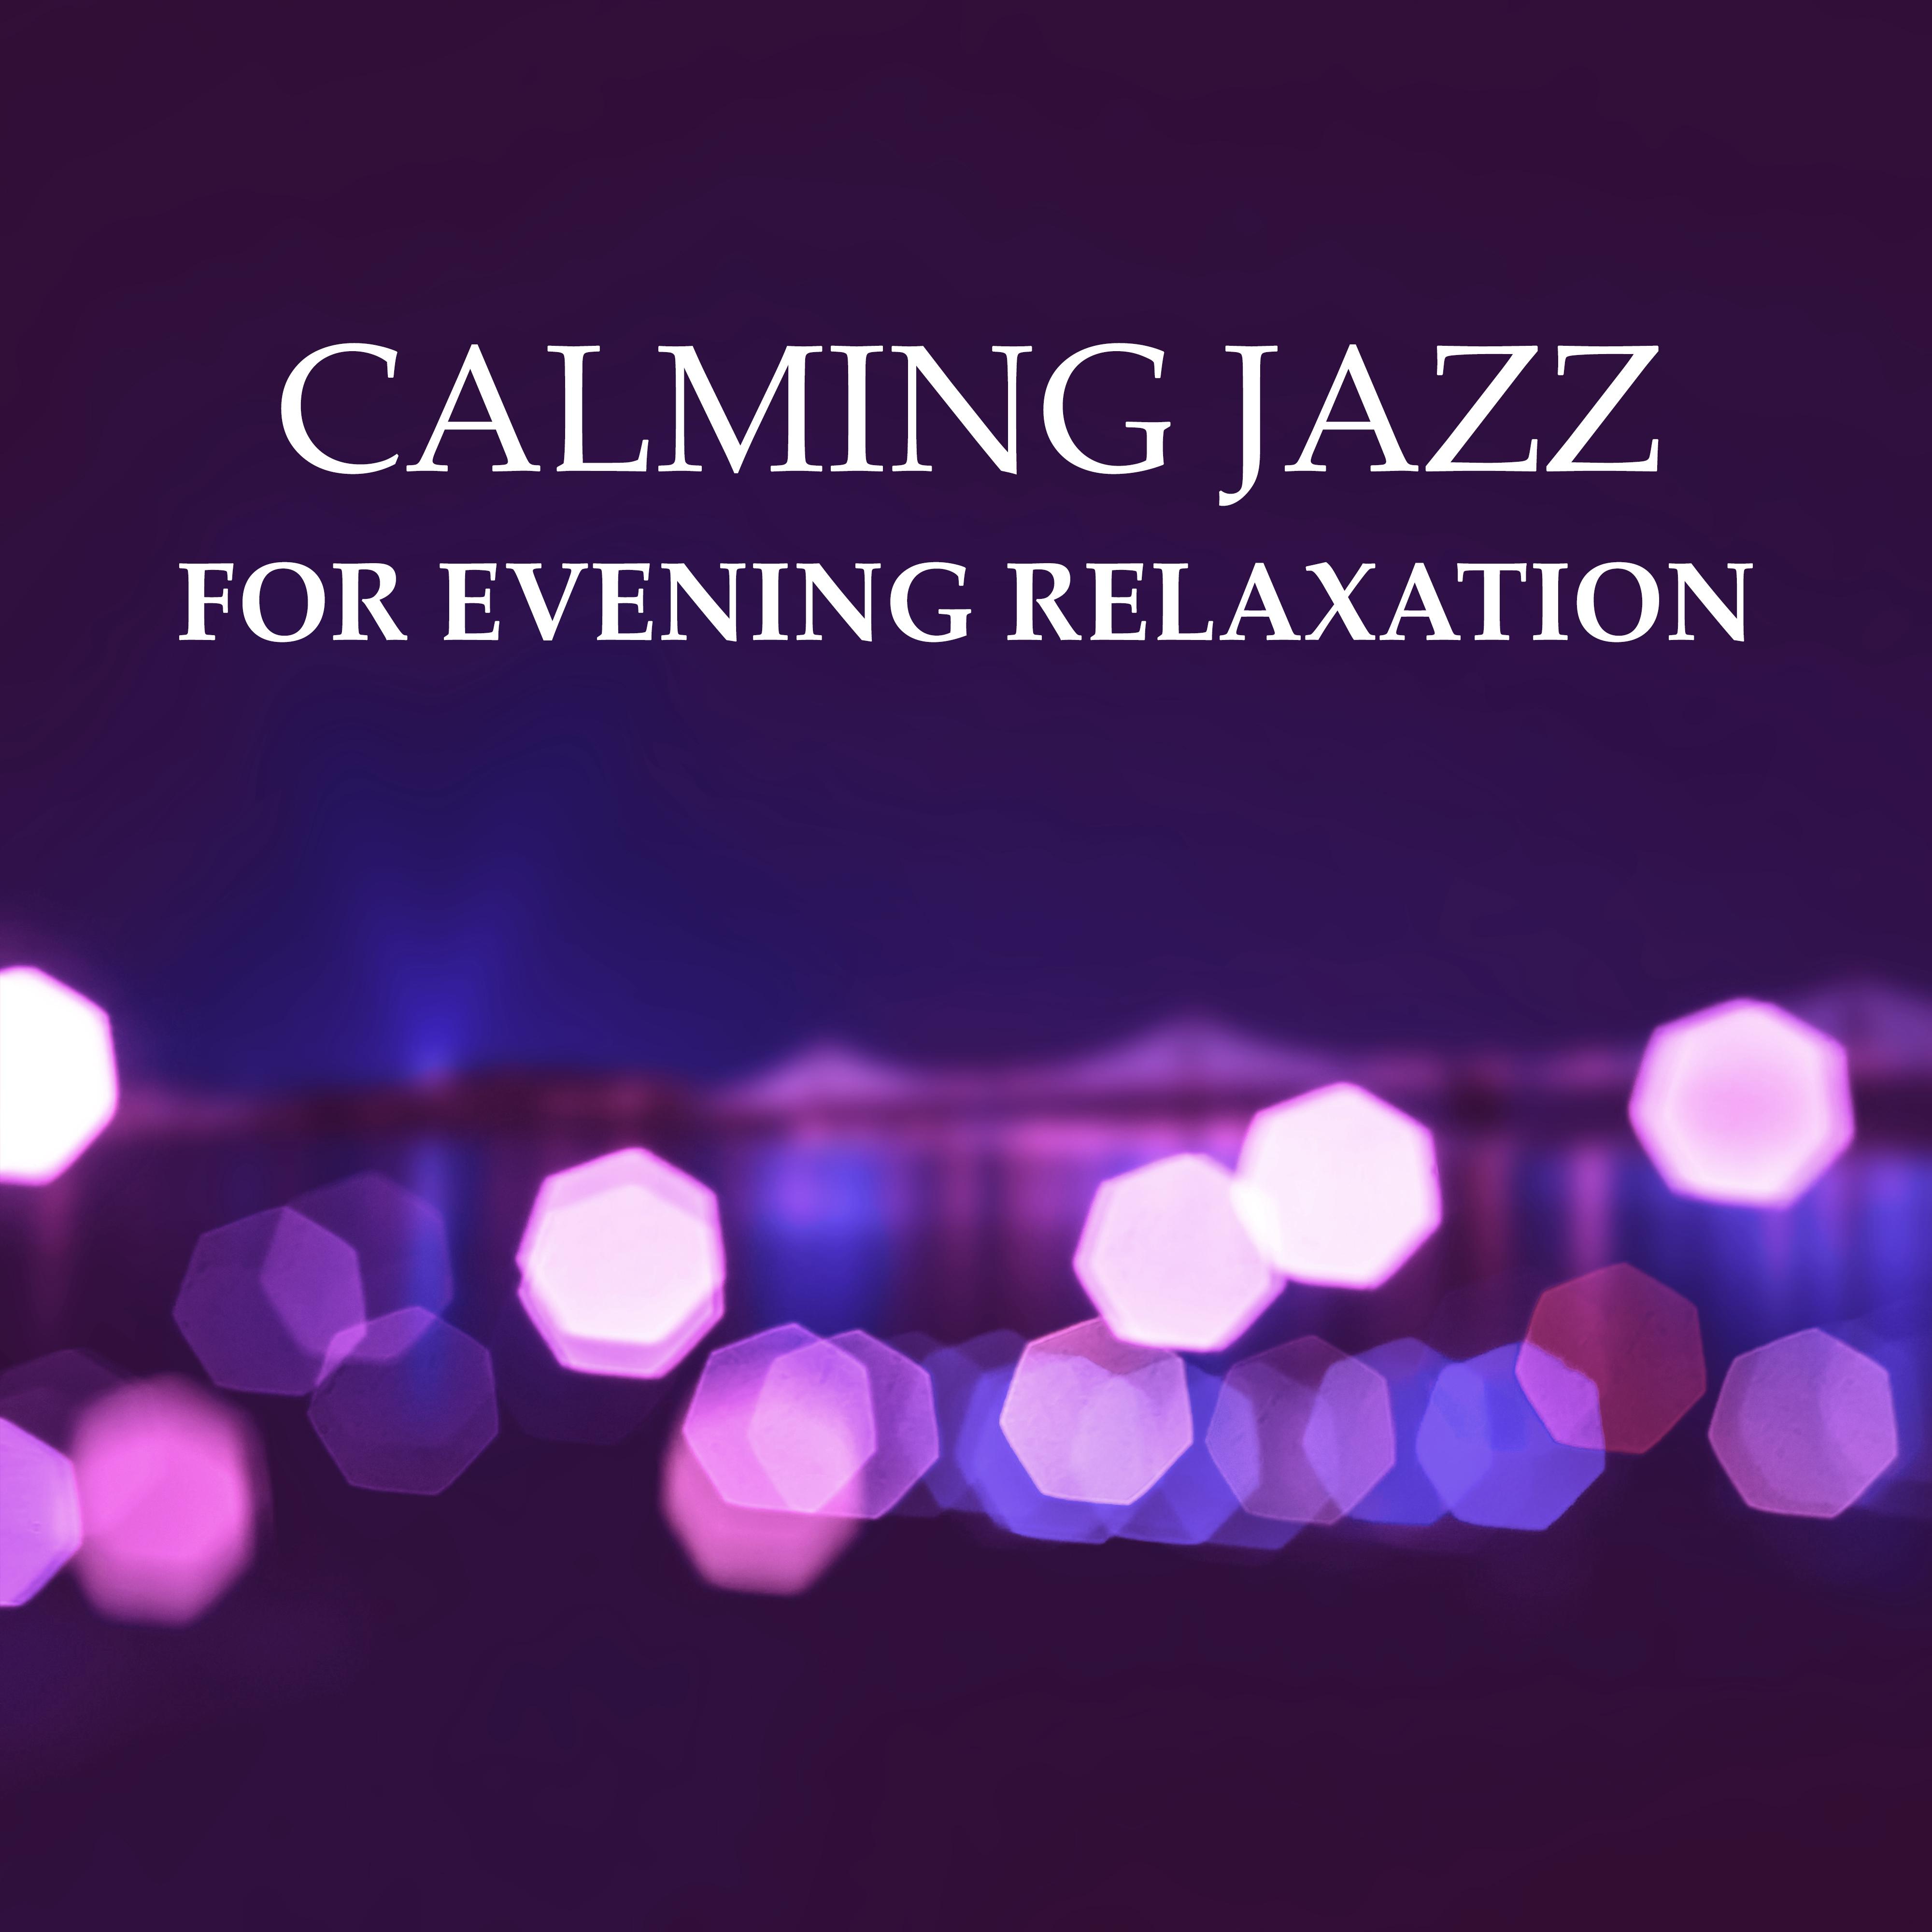 Calming Jazz for Evening Relaxation  Stress Relief, Easy Listening, Piano Bar, Guitar Jazz, Stress Free